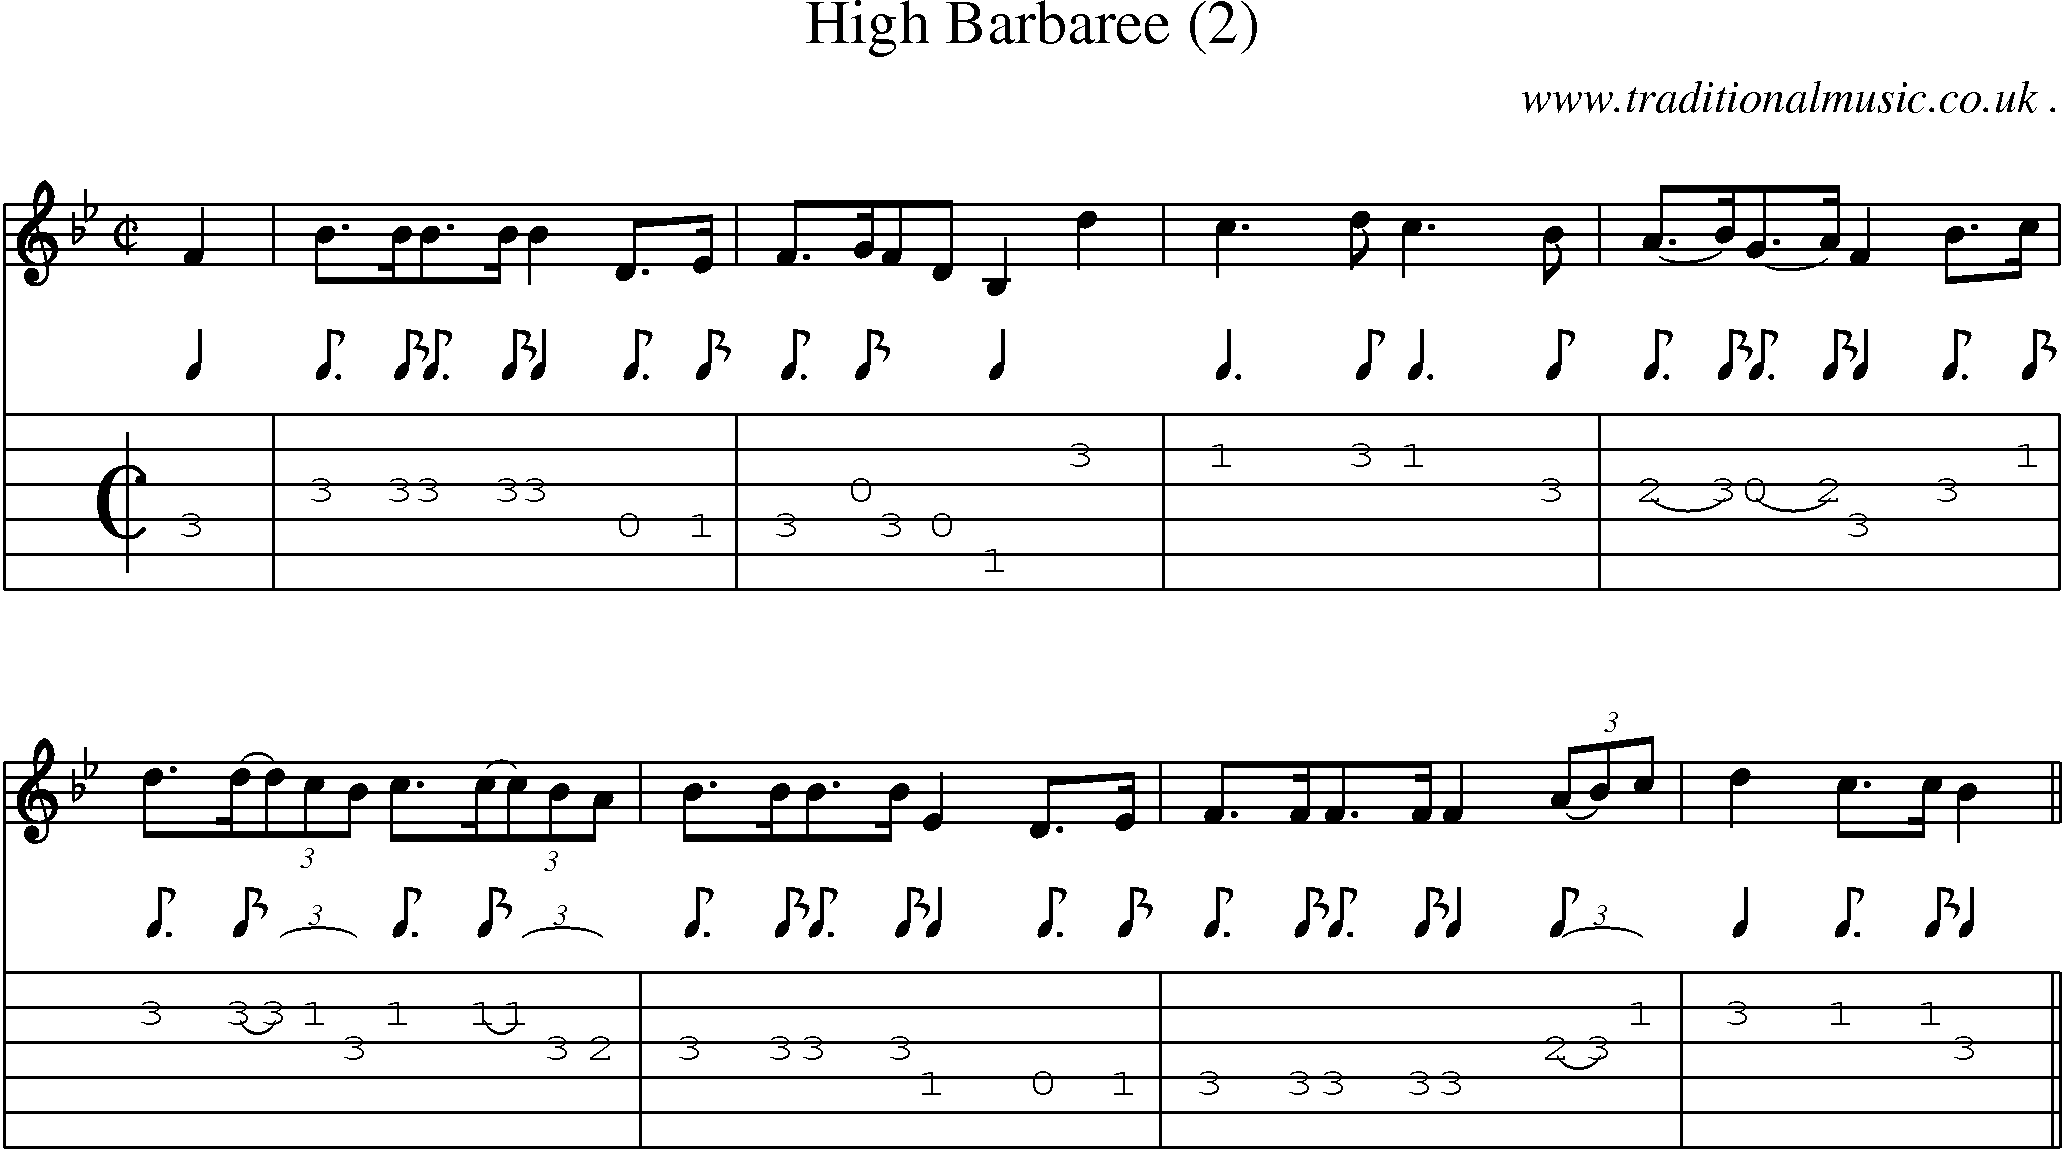 Sheet-Music and Guitar Tabs for High Barbaree (2)